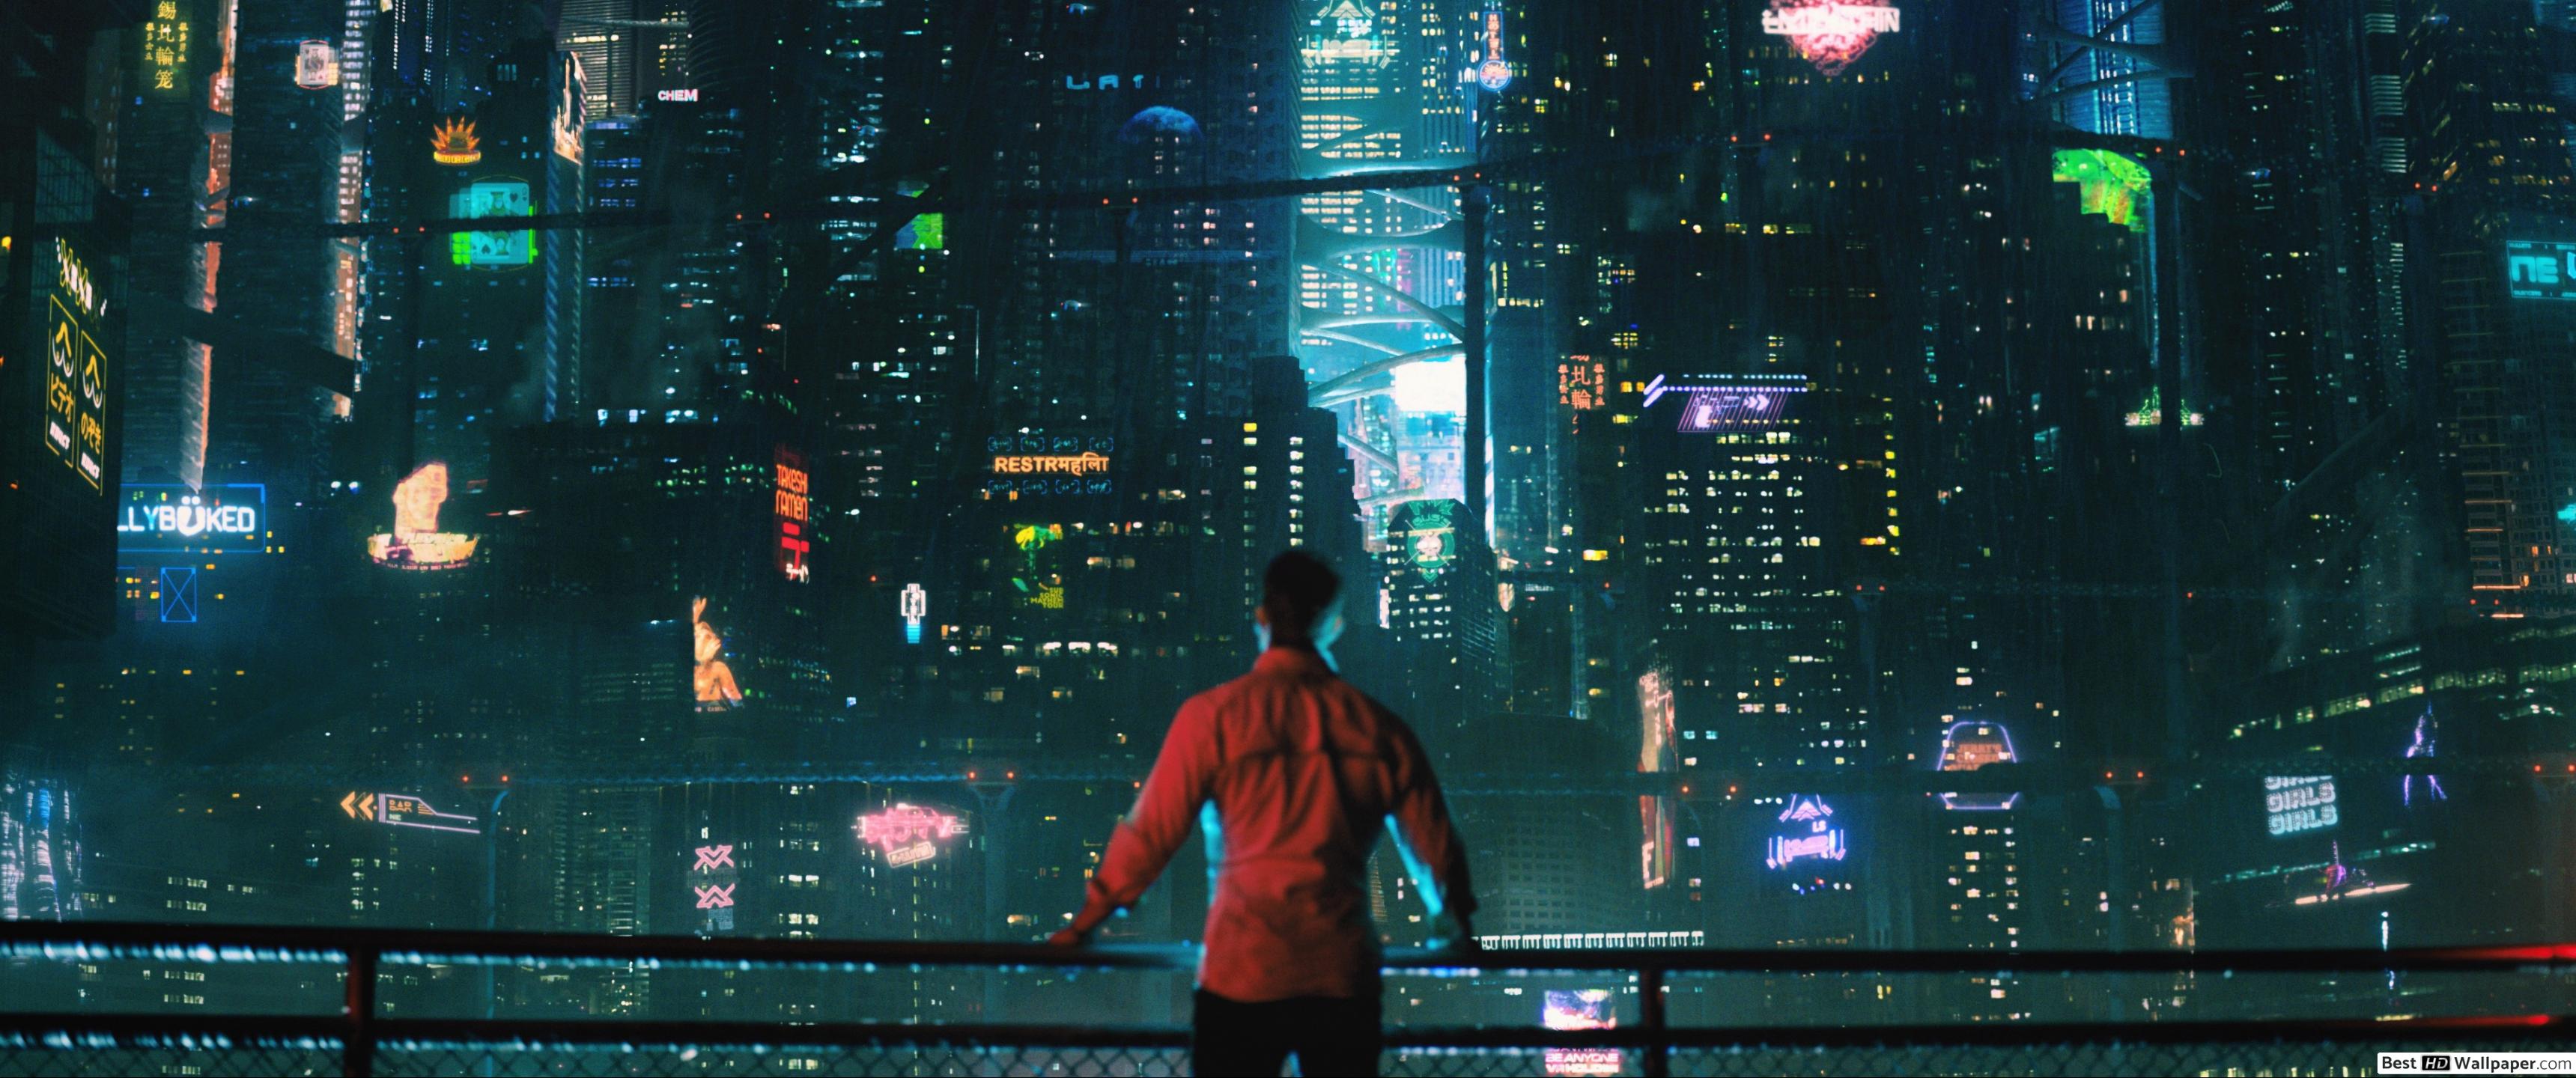 Altered Carbon HD wallpaper download